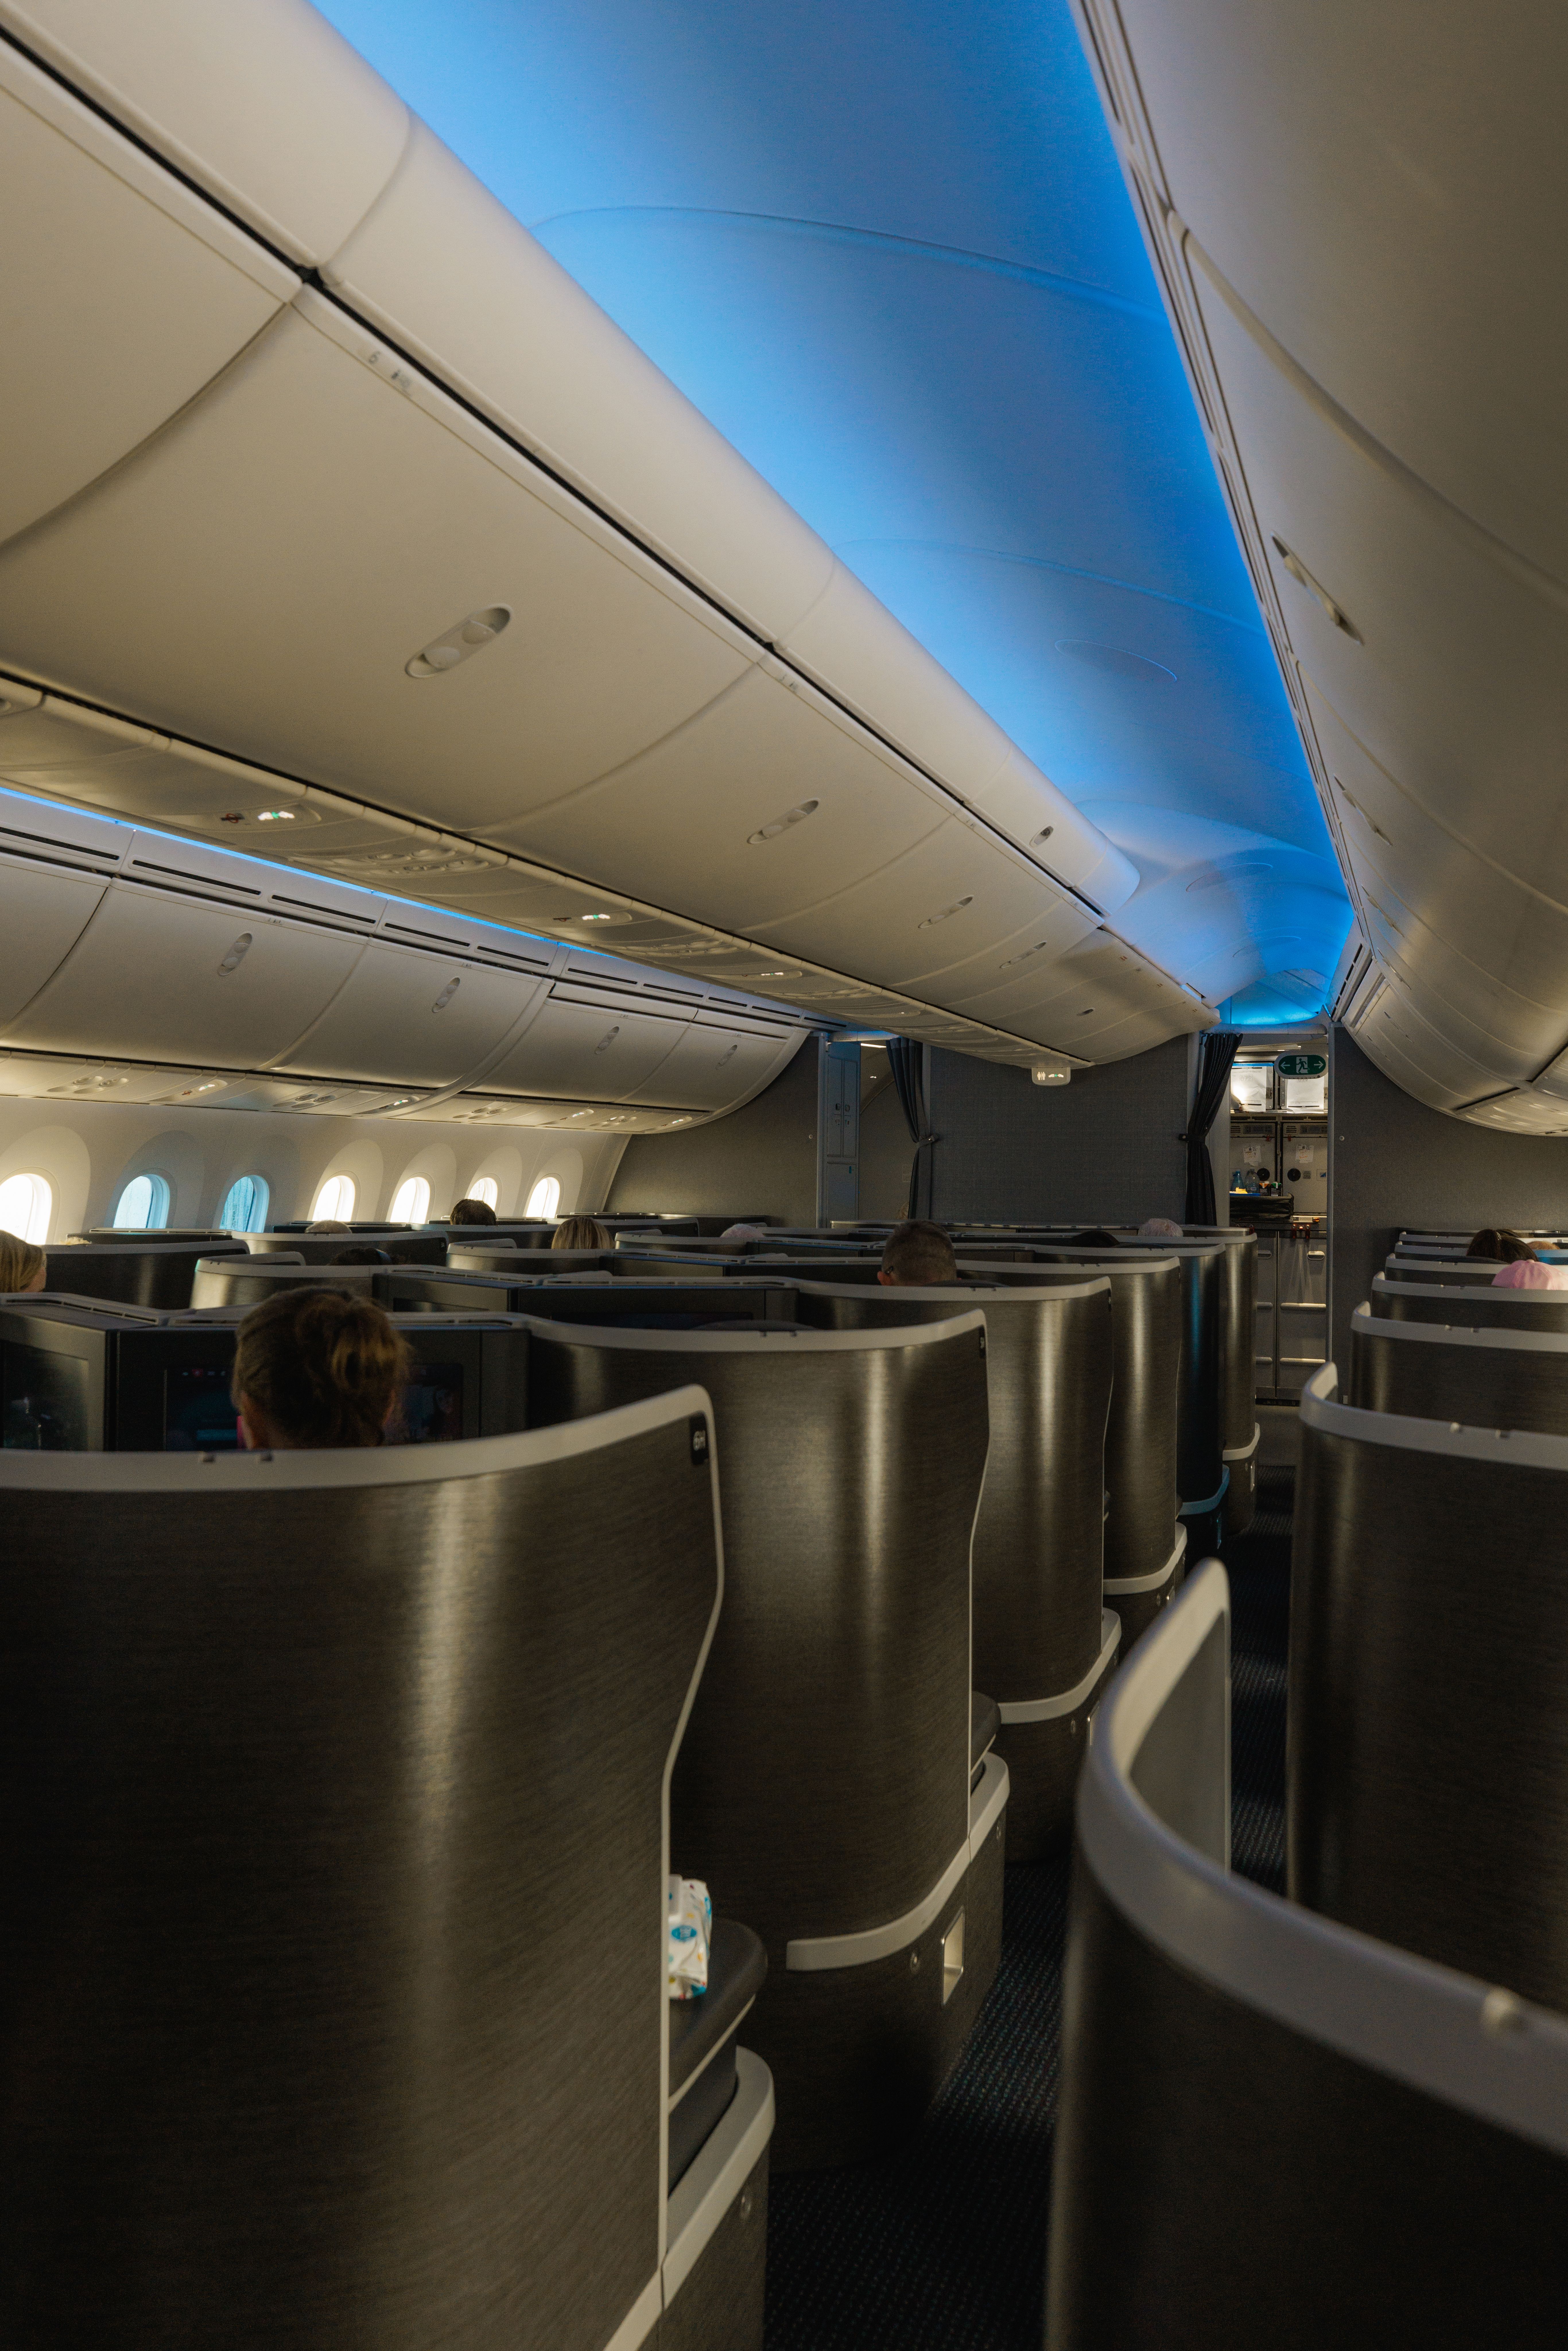 Inside American Airlines' Flagship Business Class cabin.